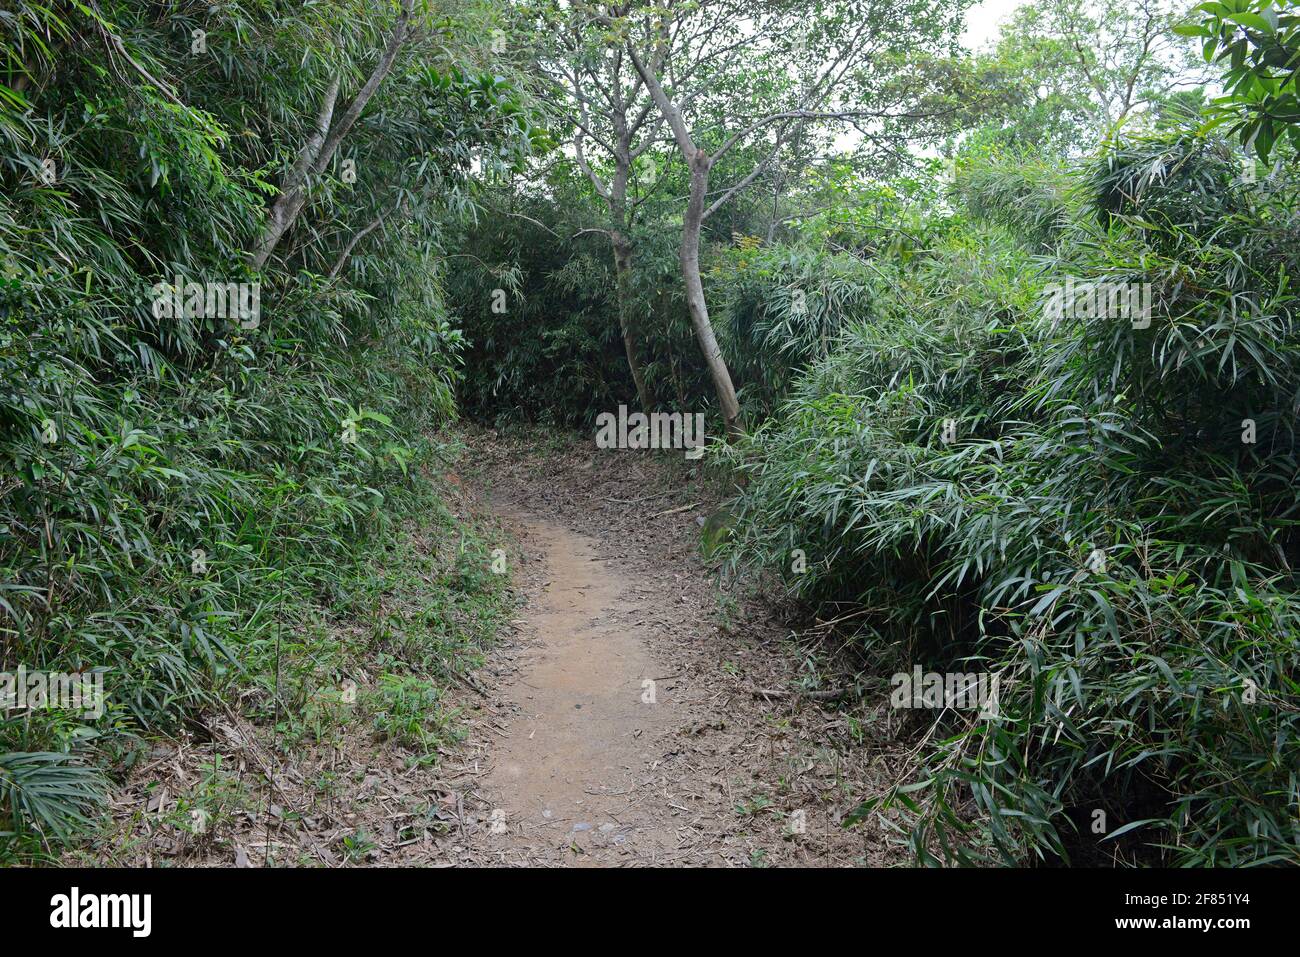 The native bamboo Arundinaria Shuiyingiana grows by a path in Kowloon reservoir country park in Hong Kong, China Stock Photo